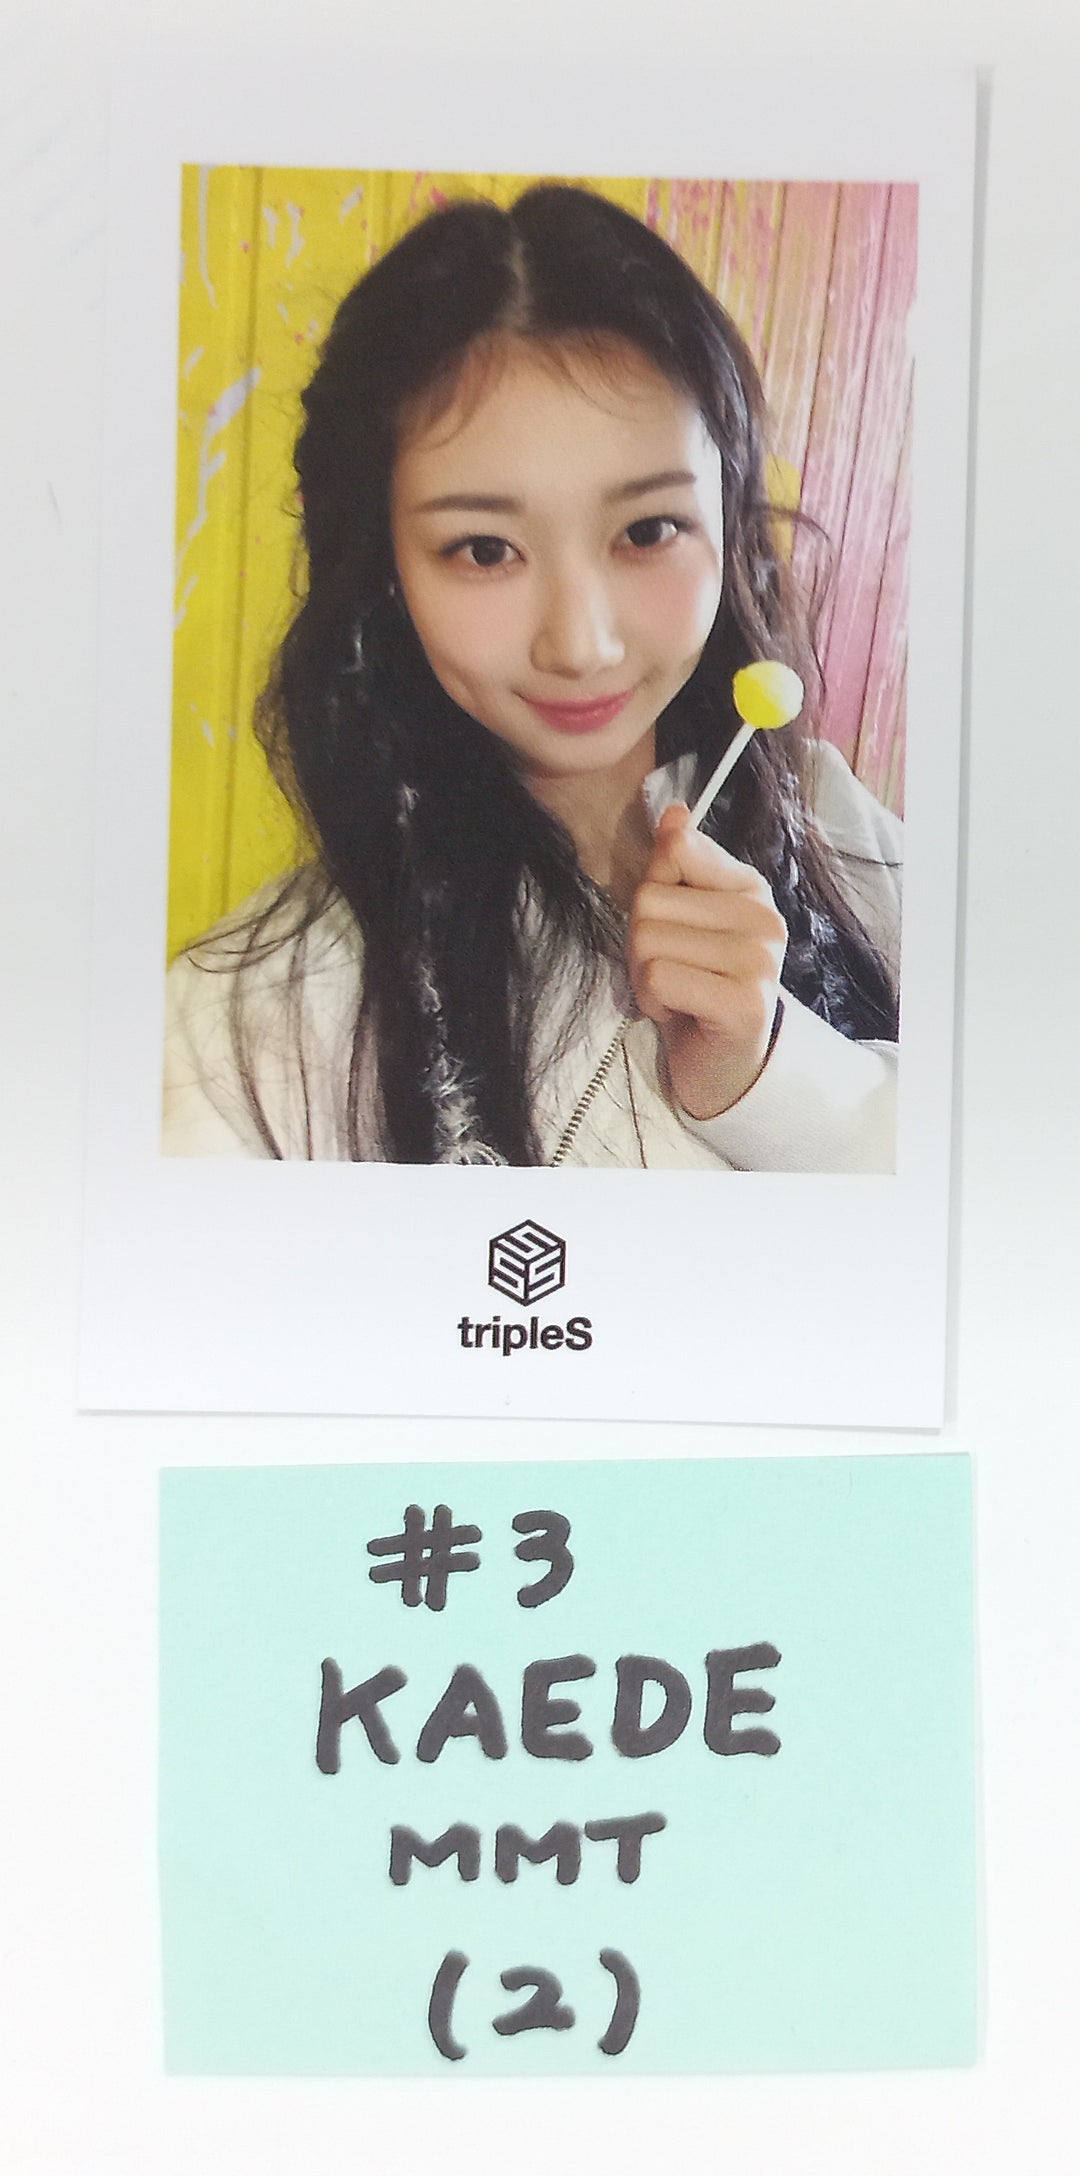 tripleS "ASSEMBLE24" - MMT Pre-Order Benefit Poloarid Type Photocard Round 2 [24.5.28]